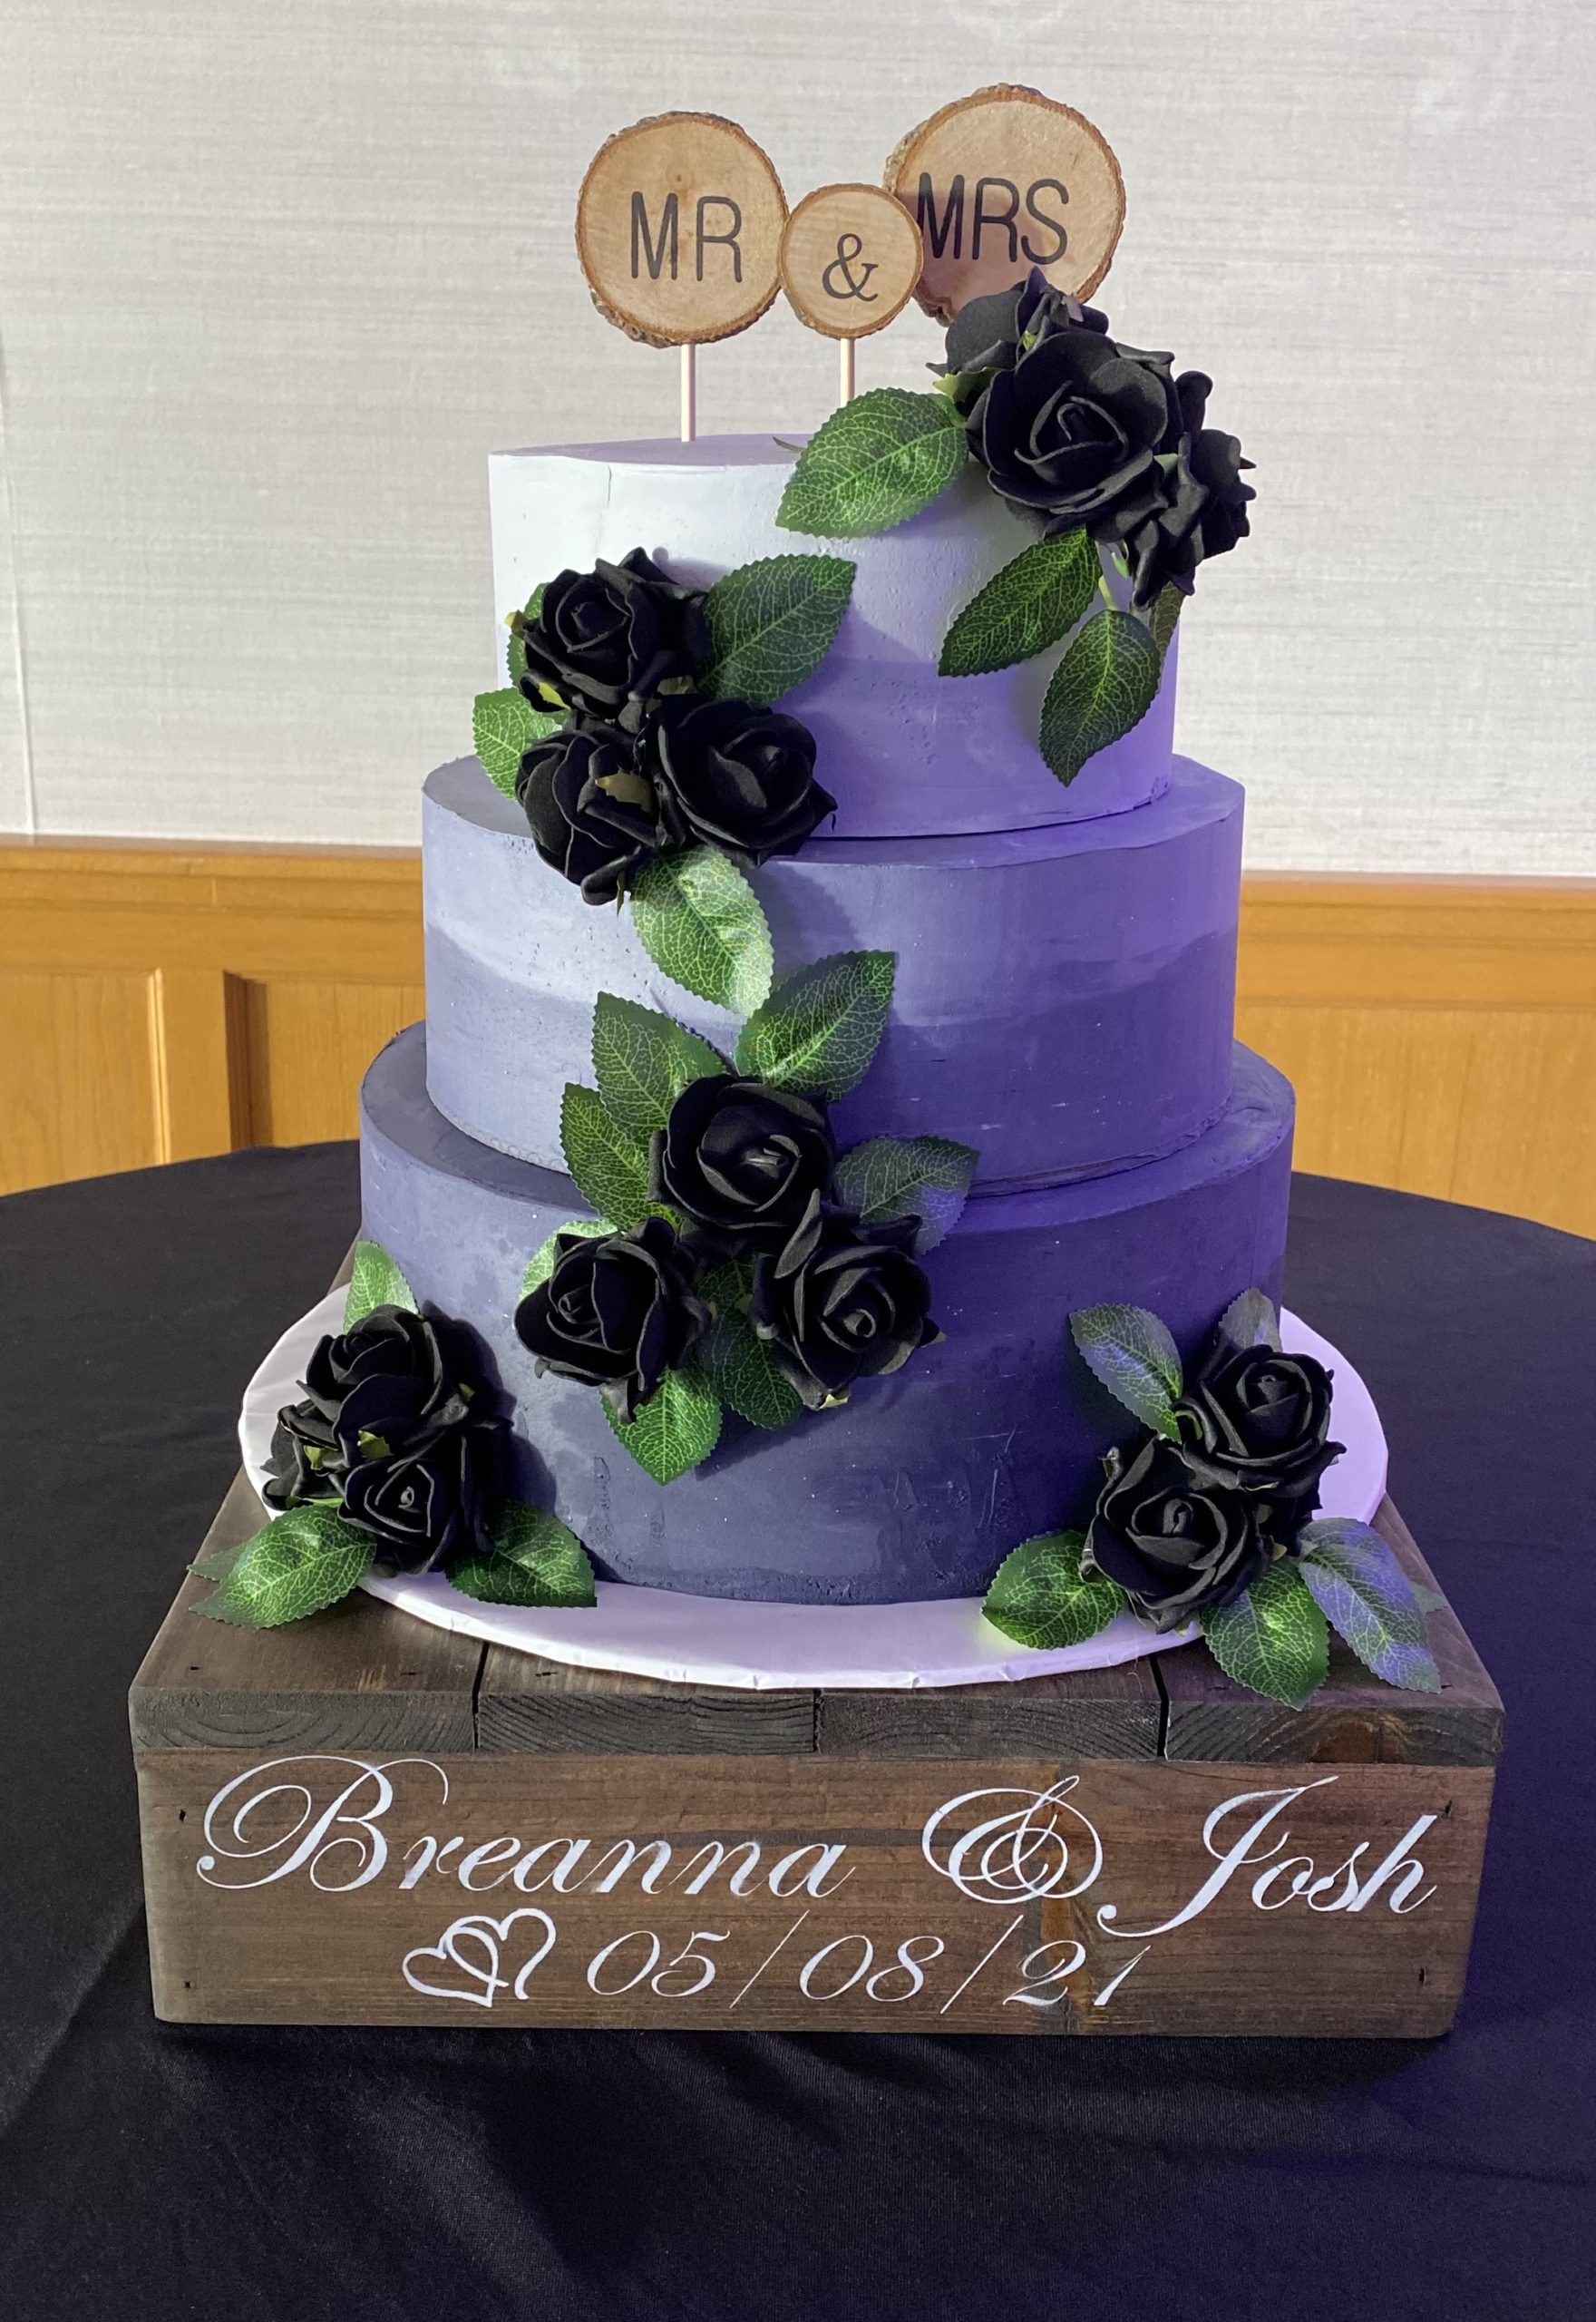 A beautiful 3-tier custom hombre wedding cake with buttercream flowers from Village Patisserie in Toledo, Ohio